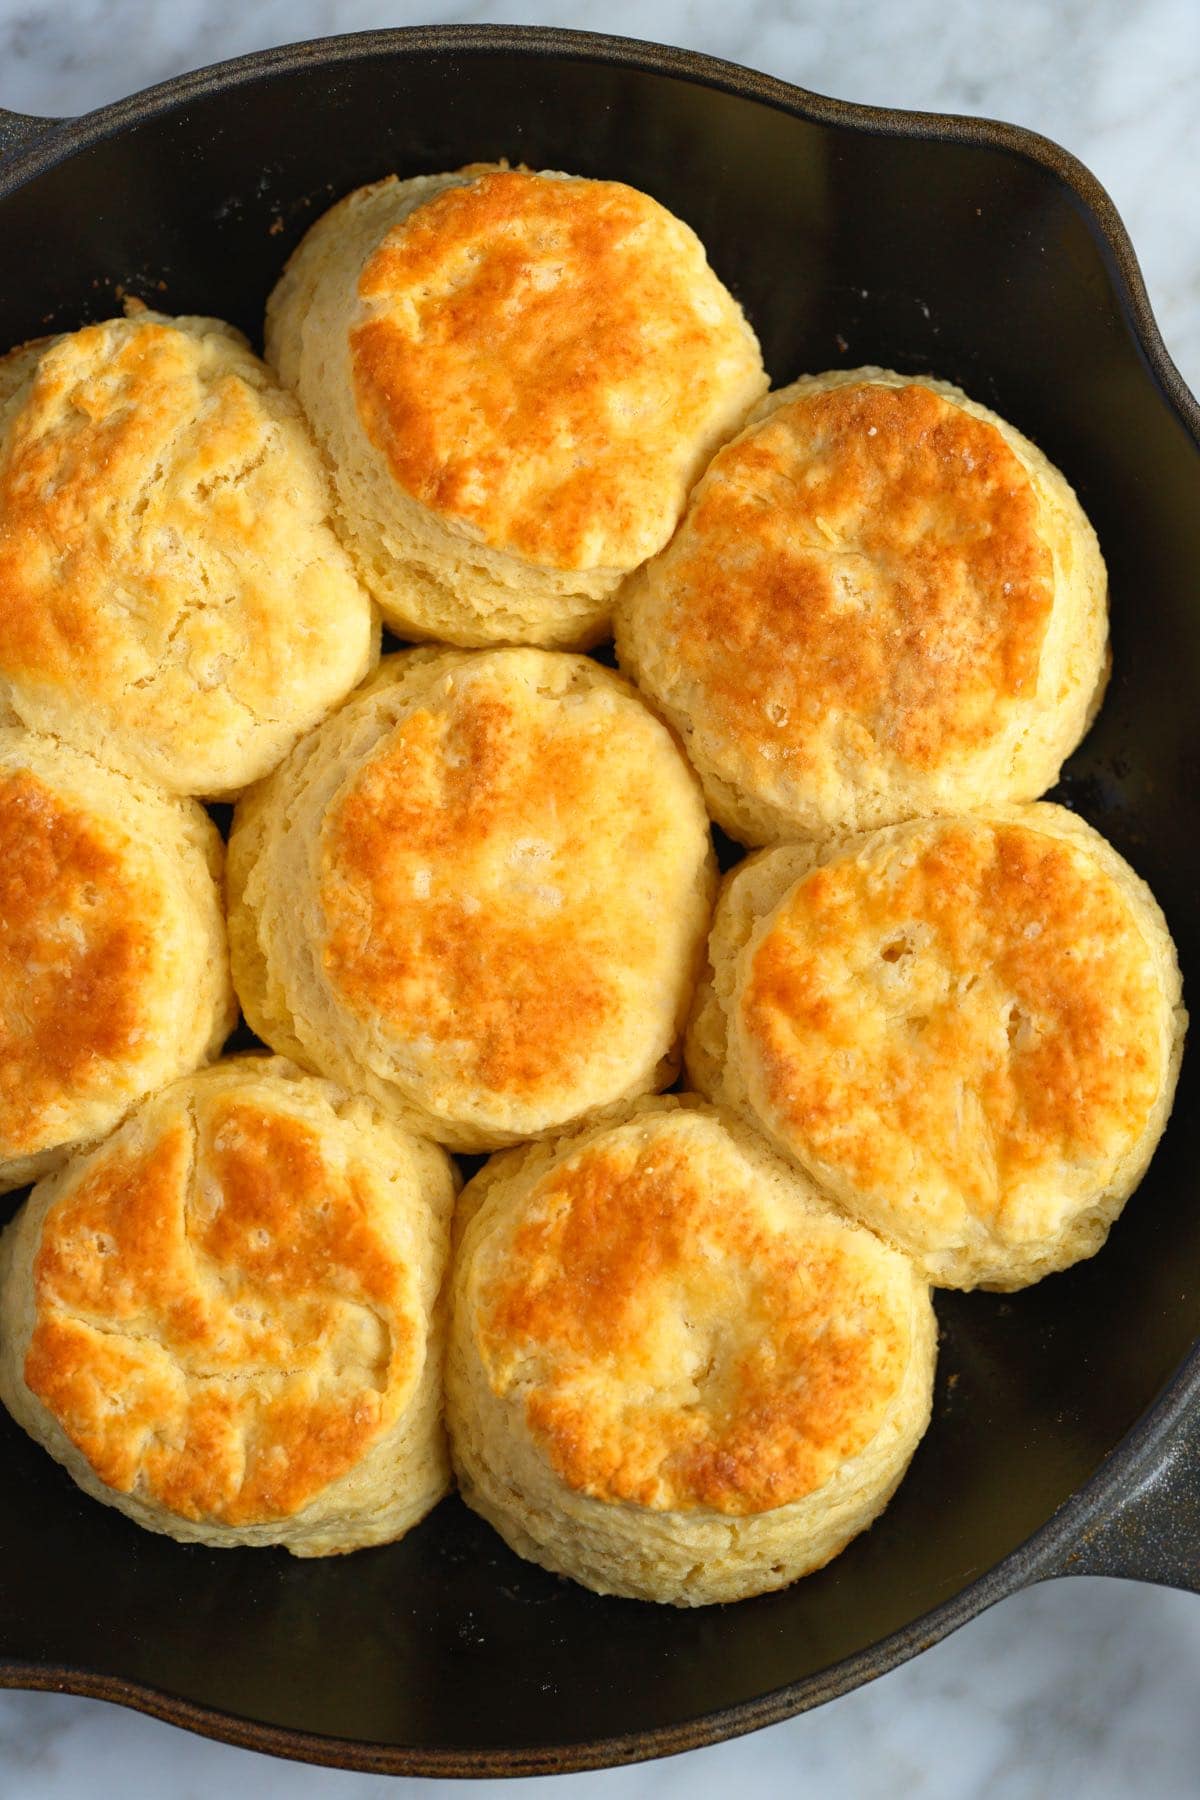 Baked Biscuits in a Skillet